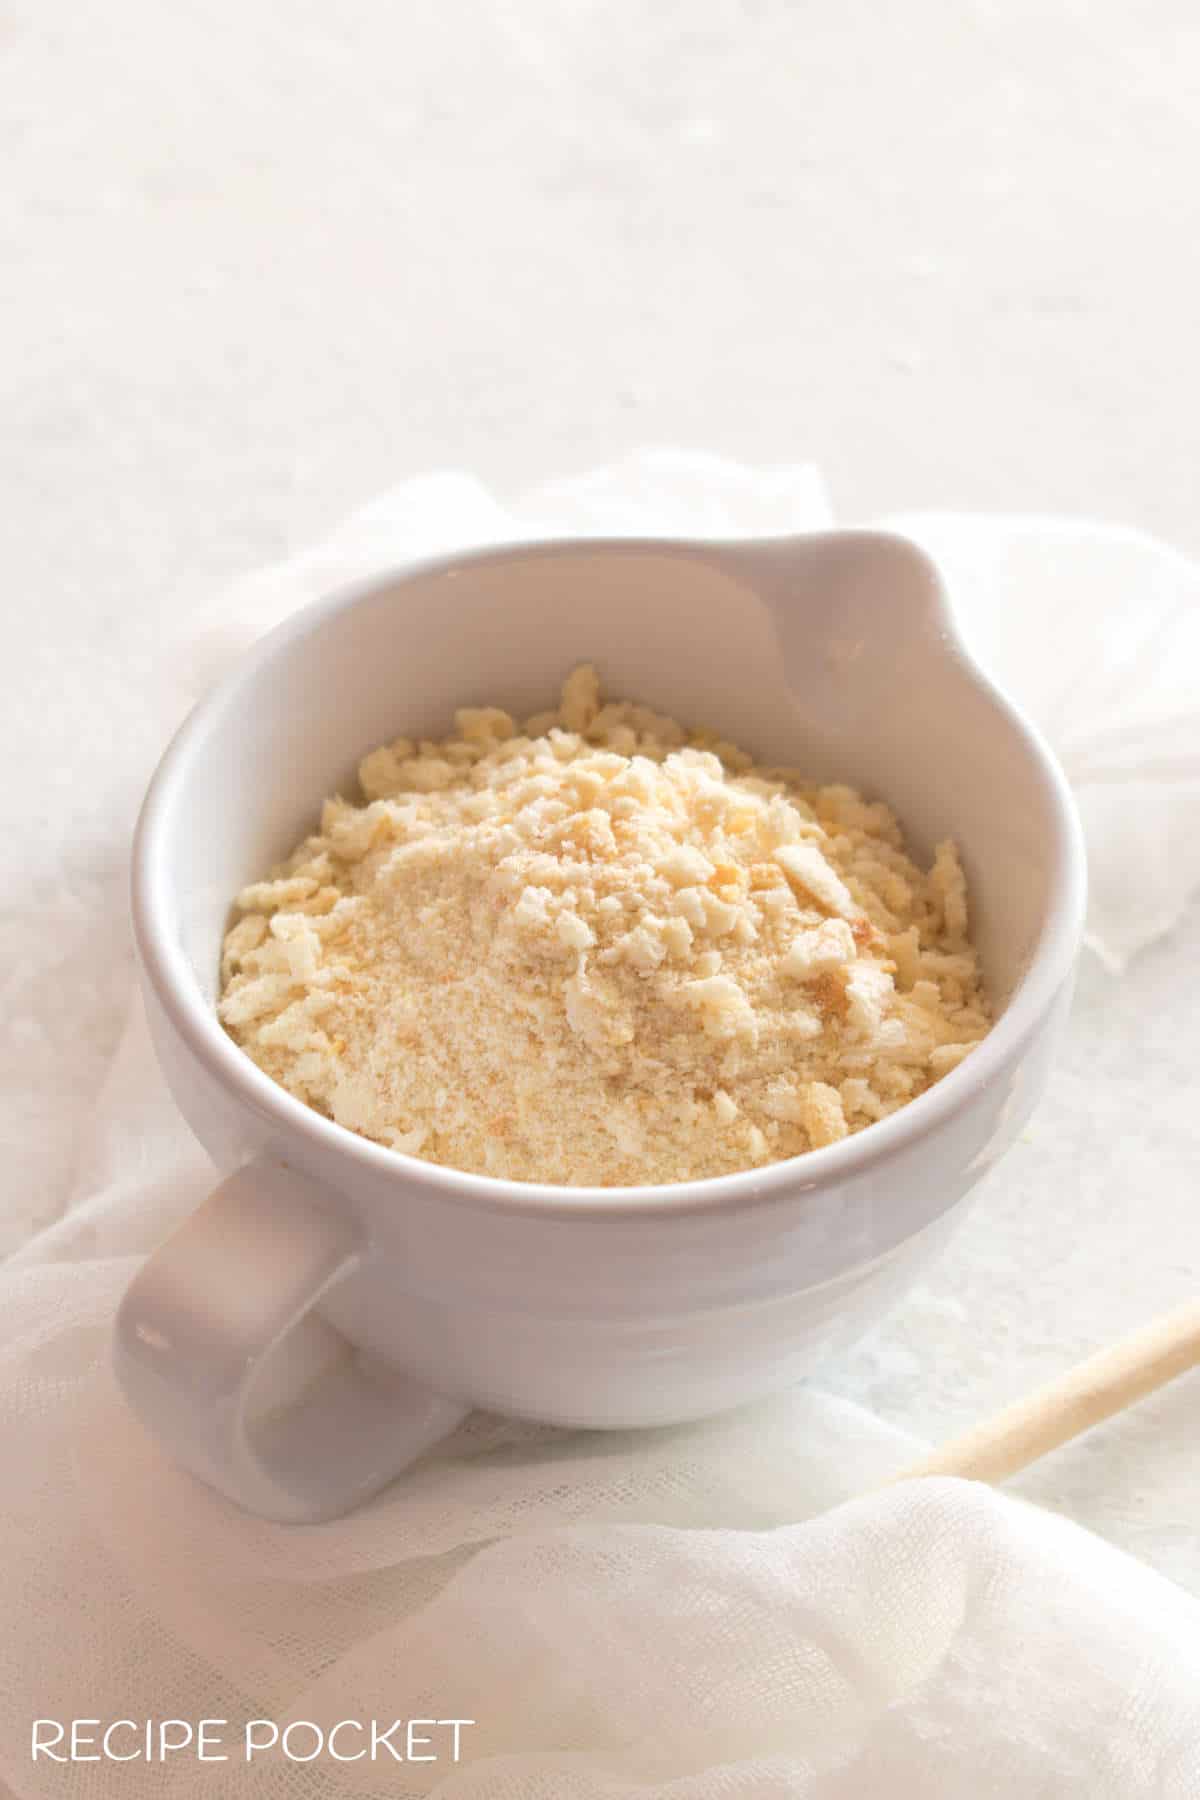 Main image for article on how to make breadcrumbs without a food processor. A jug with breadcrumbs.